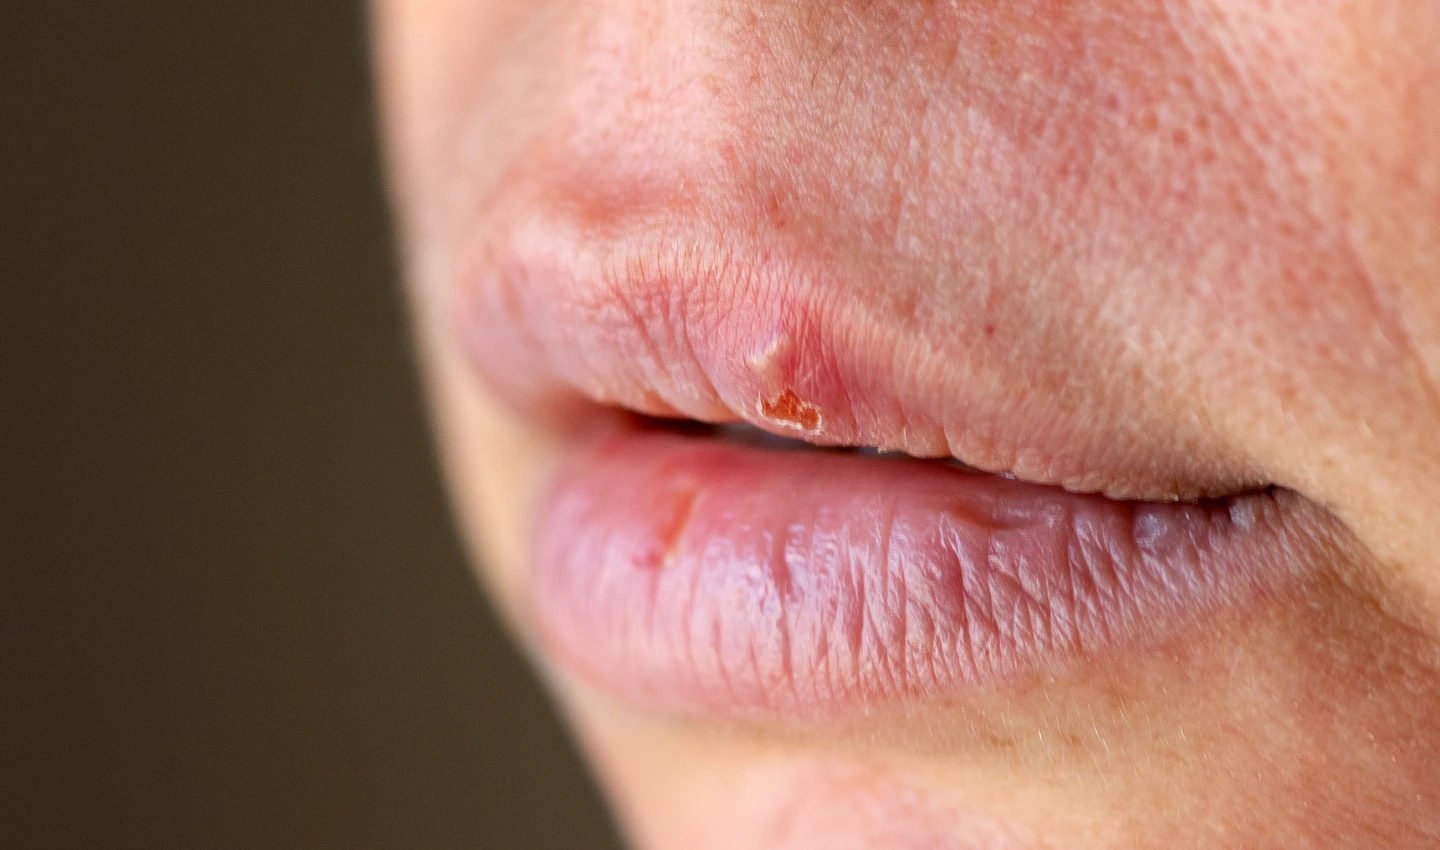 A close-up shot of a dried lip, exemplifying lip dryness, a common issue addressed in the article